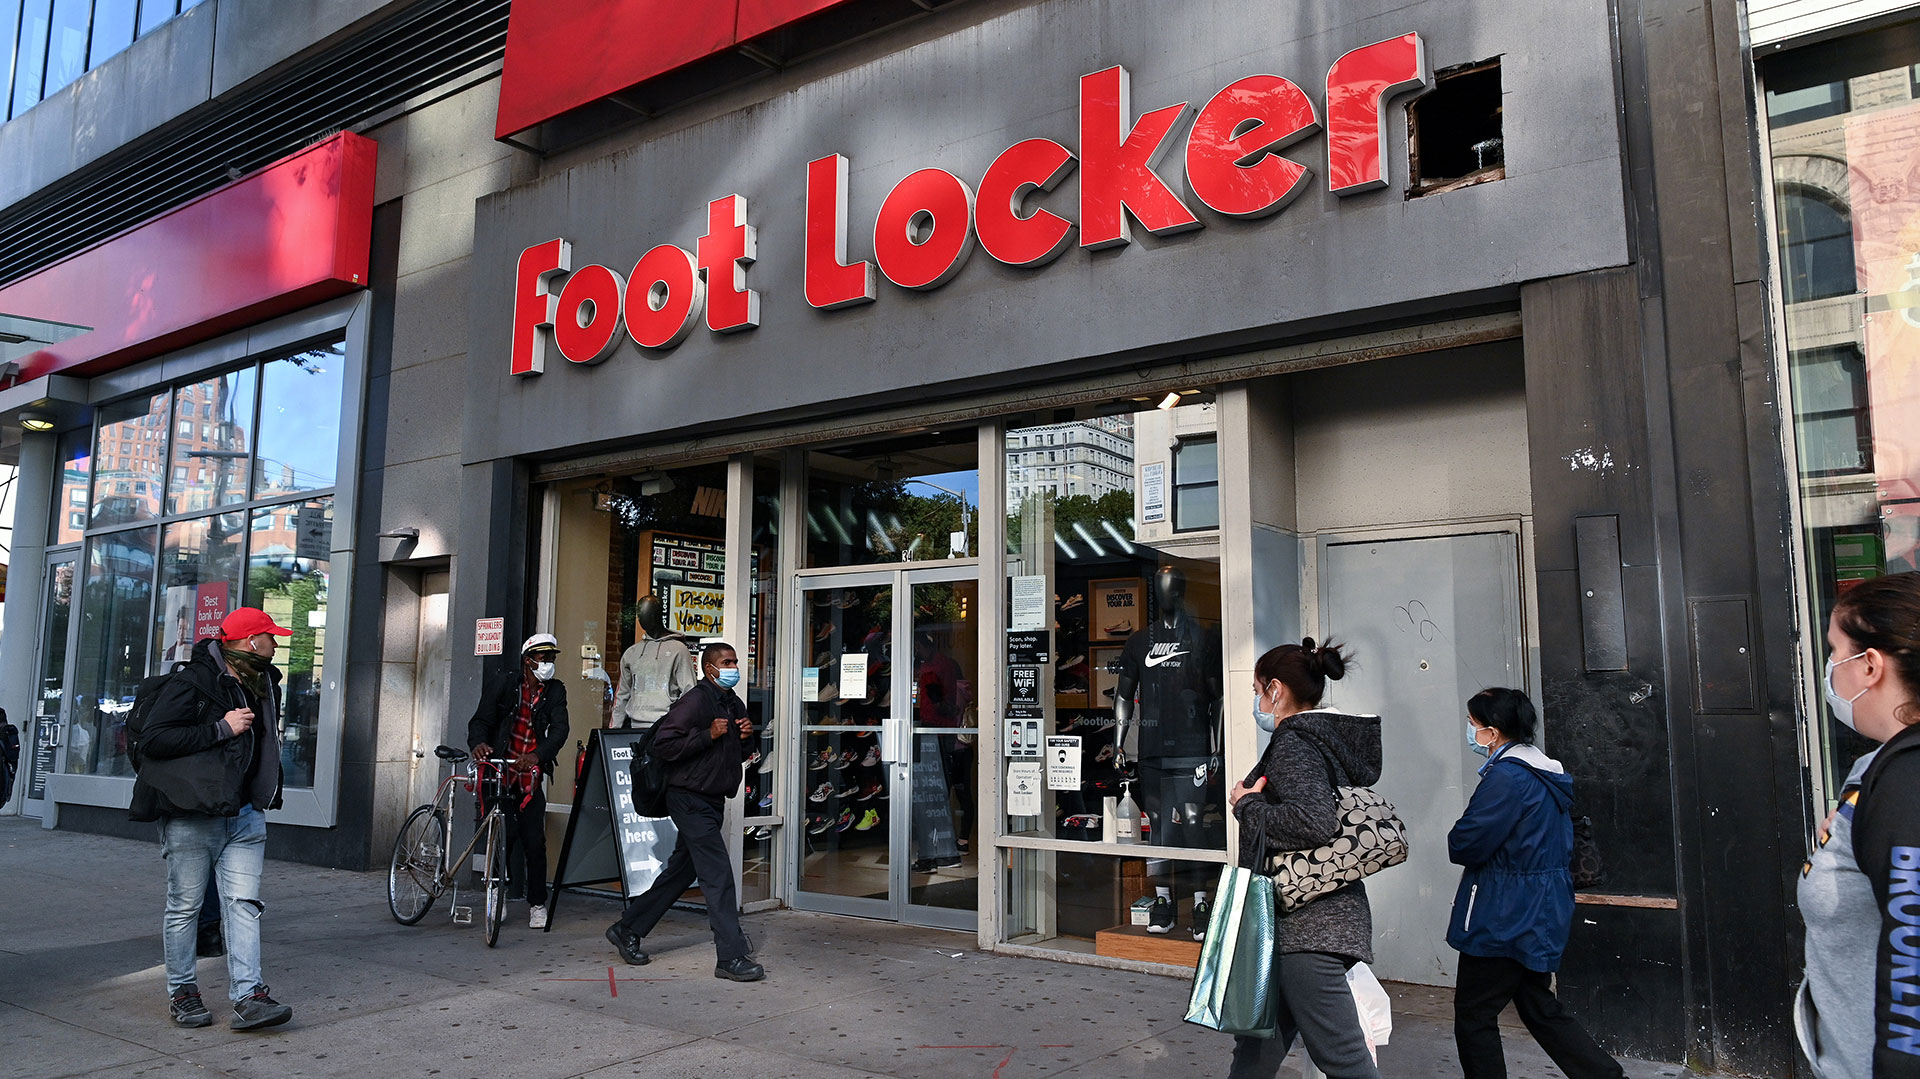 Smelten Hijsen Mooi Woman Reportedly Stabbed at Foot Locker During Nike Dunk Release | Complex